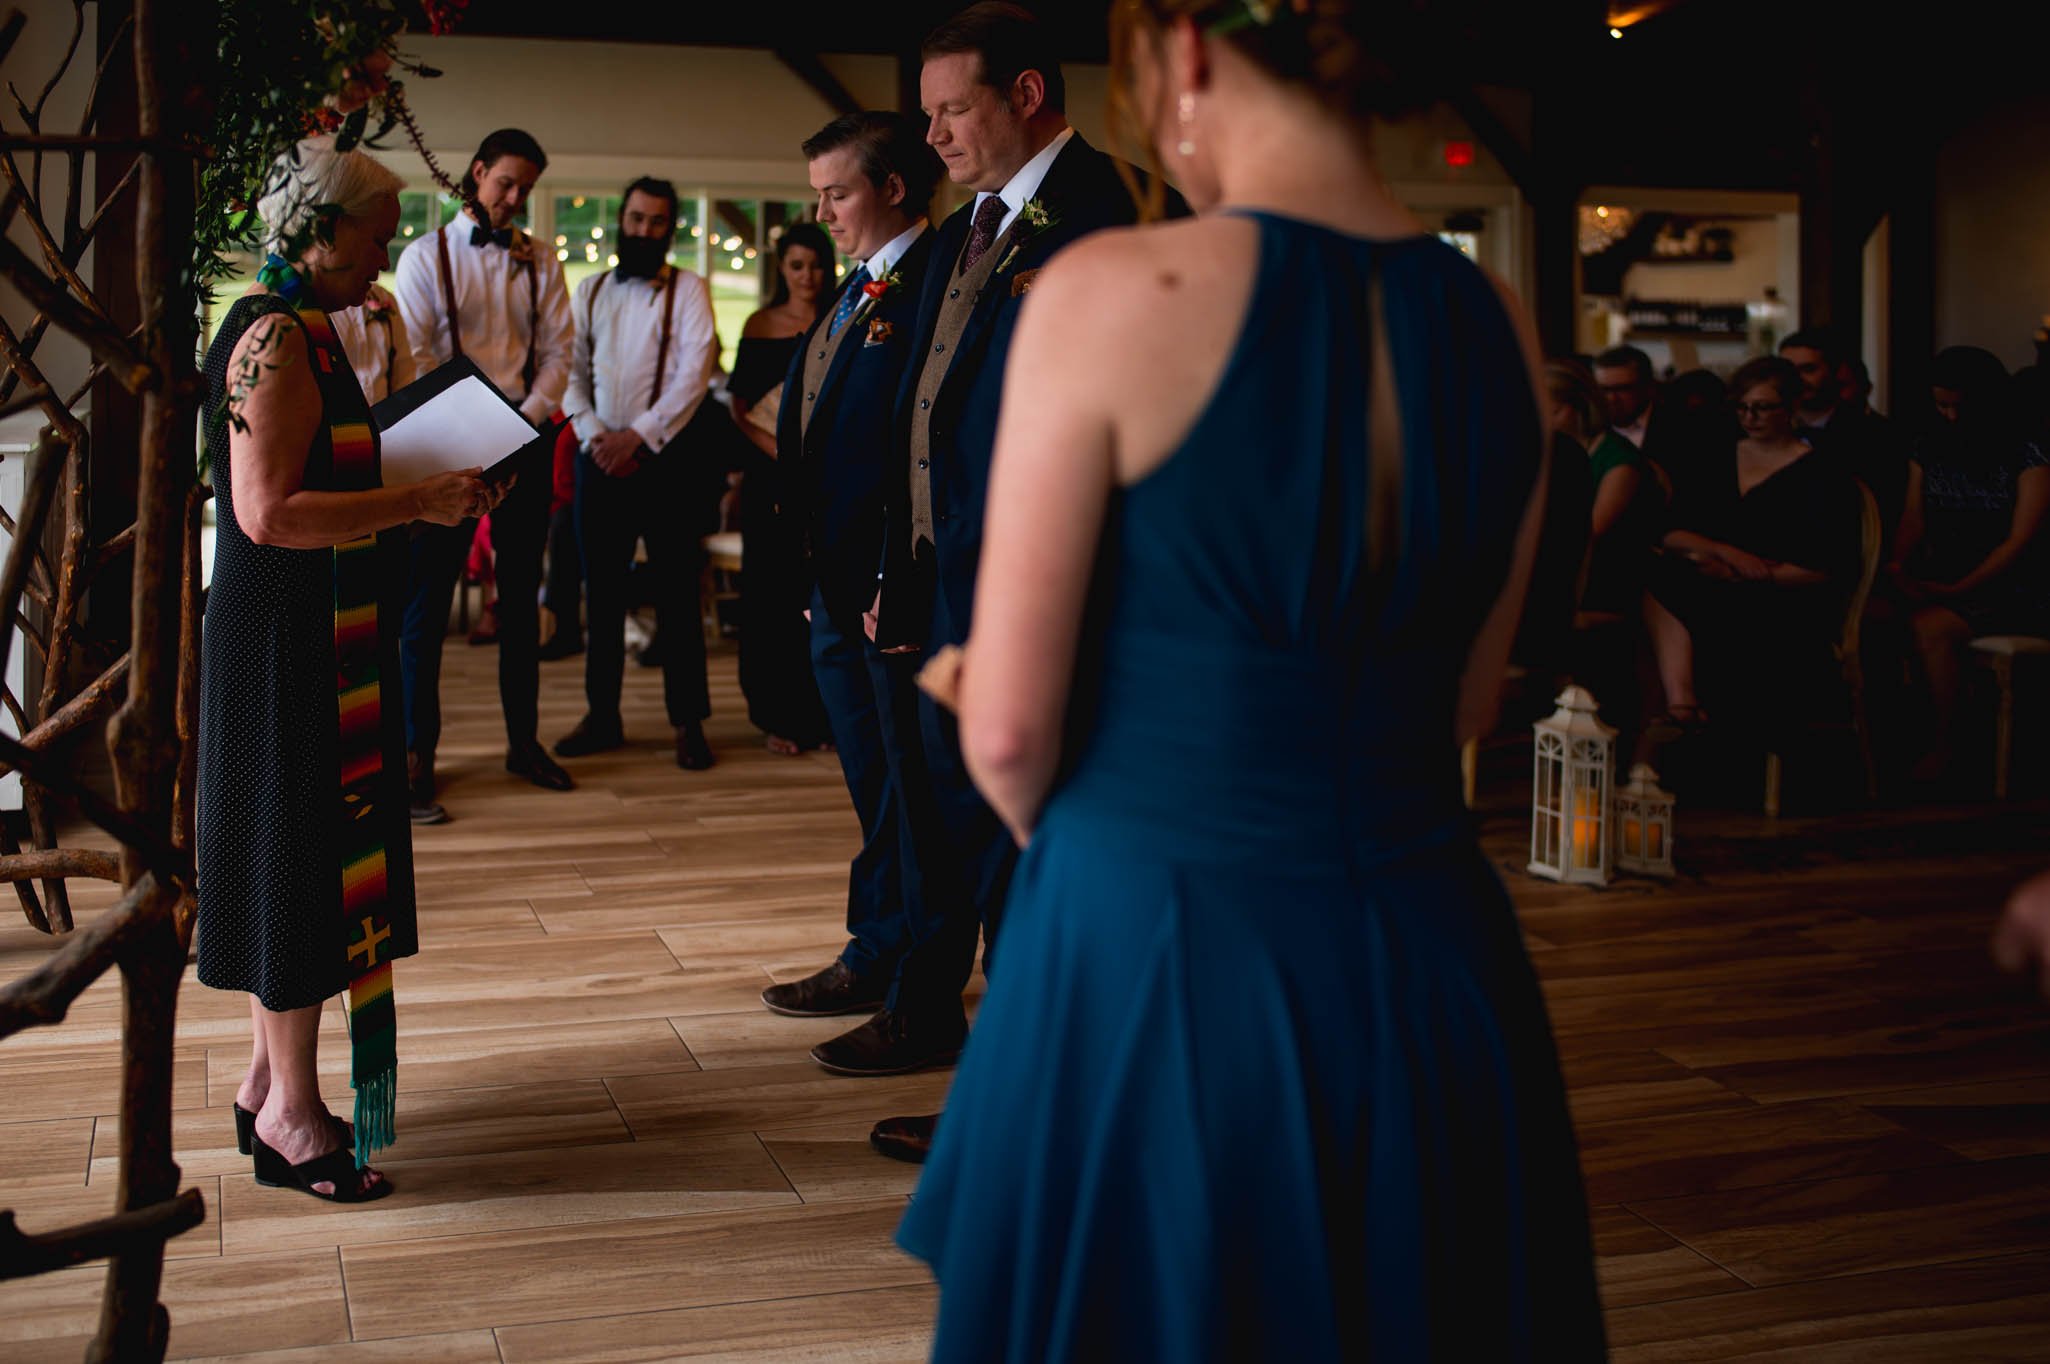 two grooms stand for their wedding ceremony and surrounded by family and friends